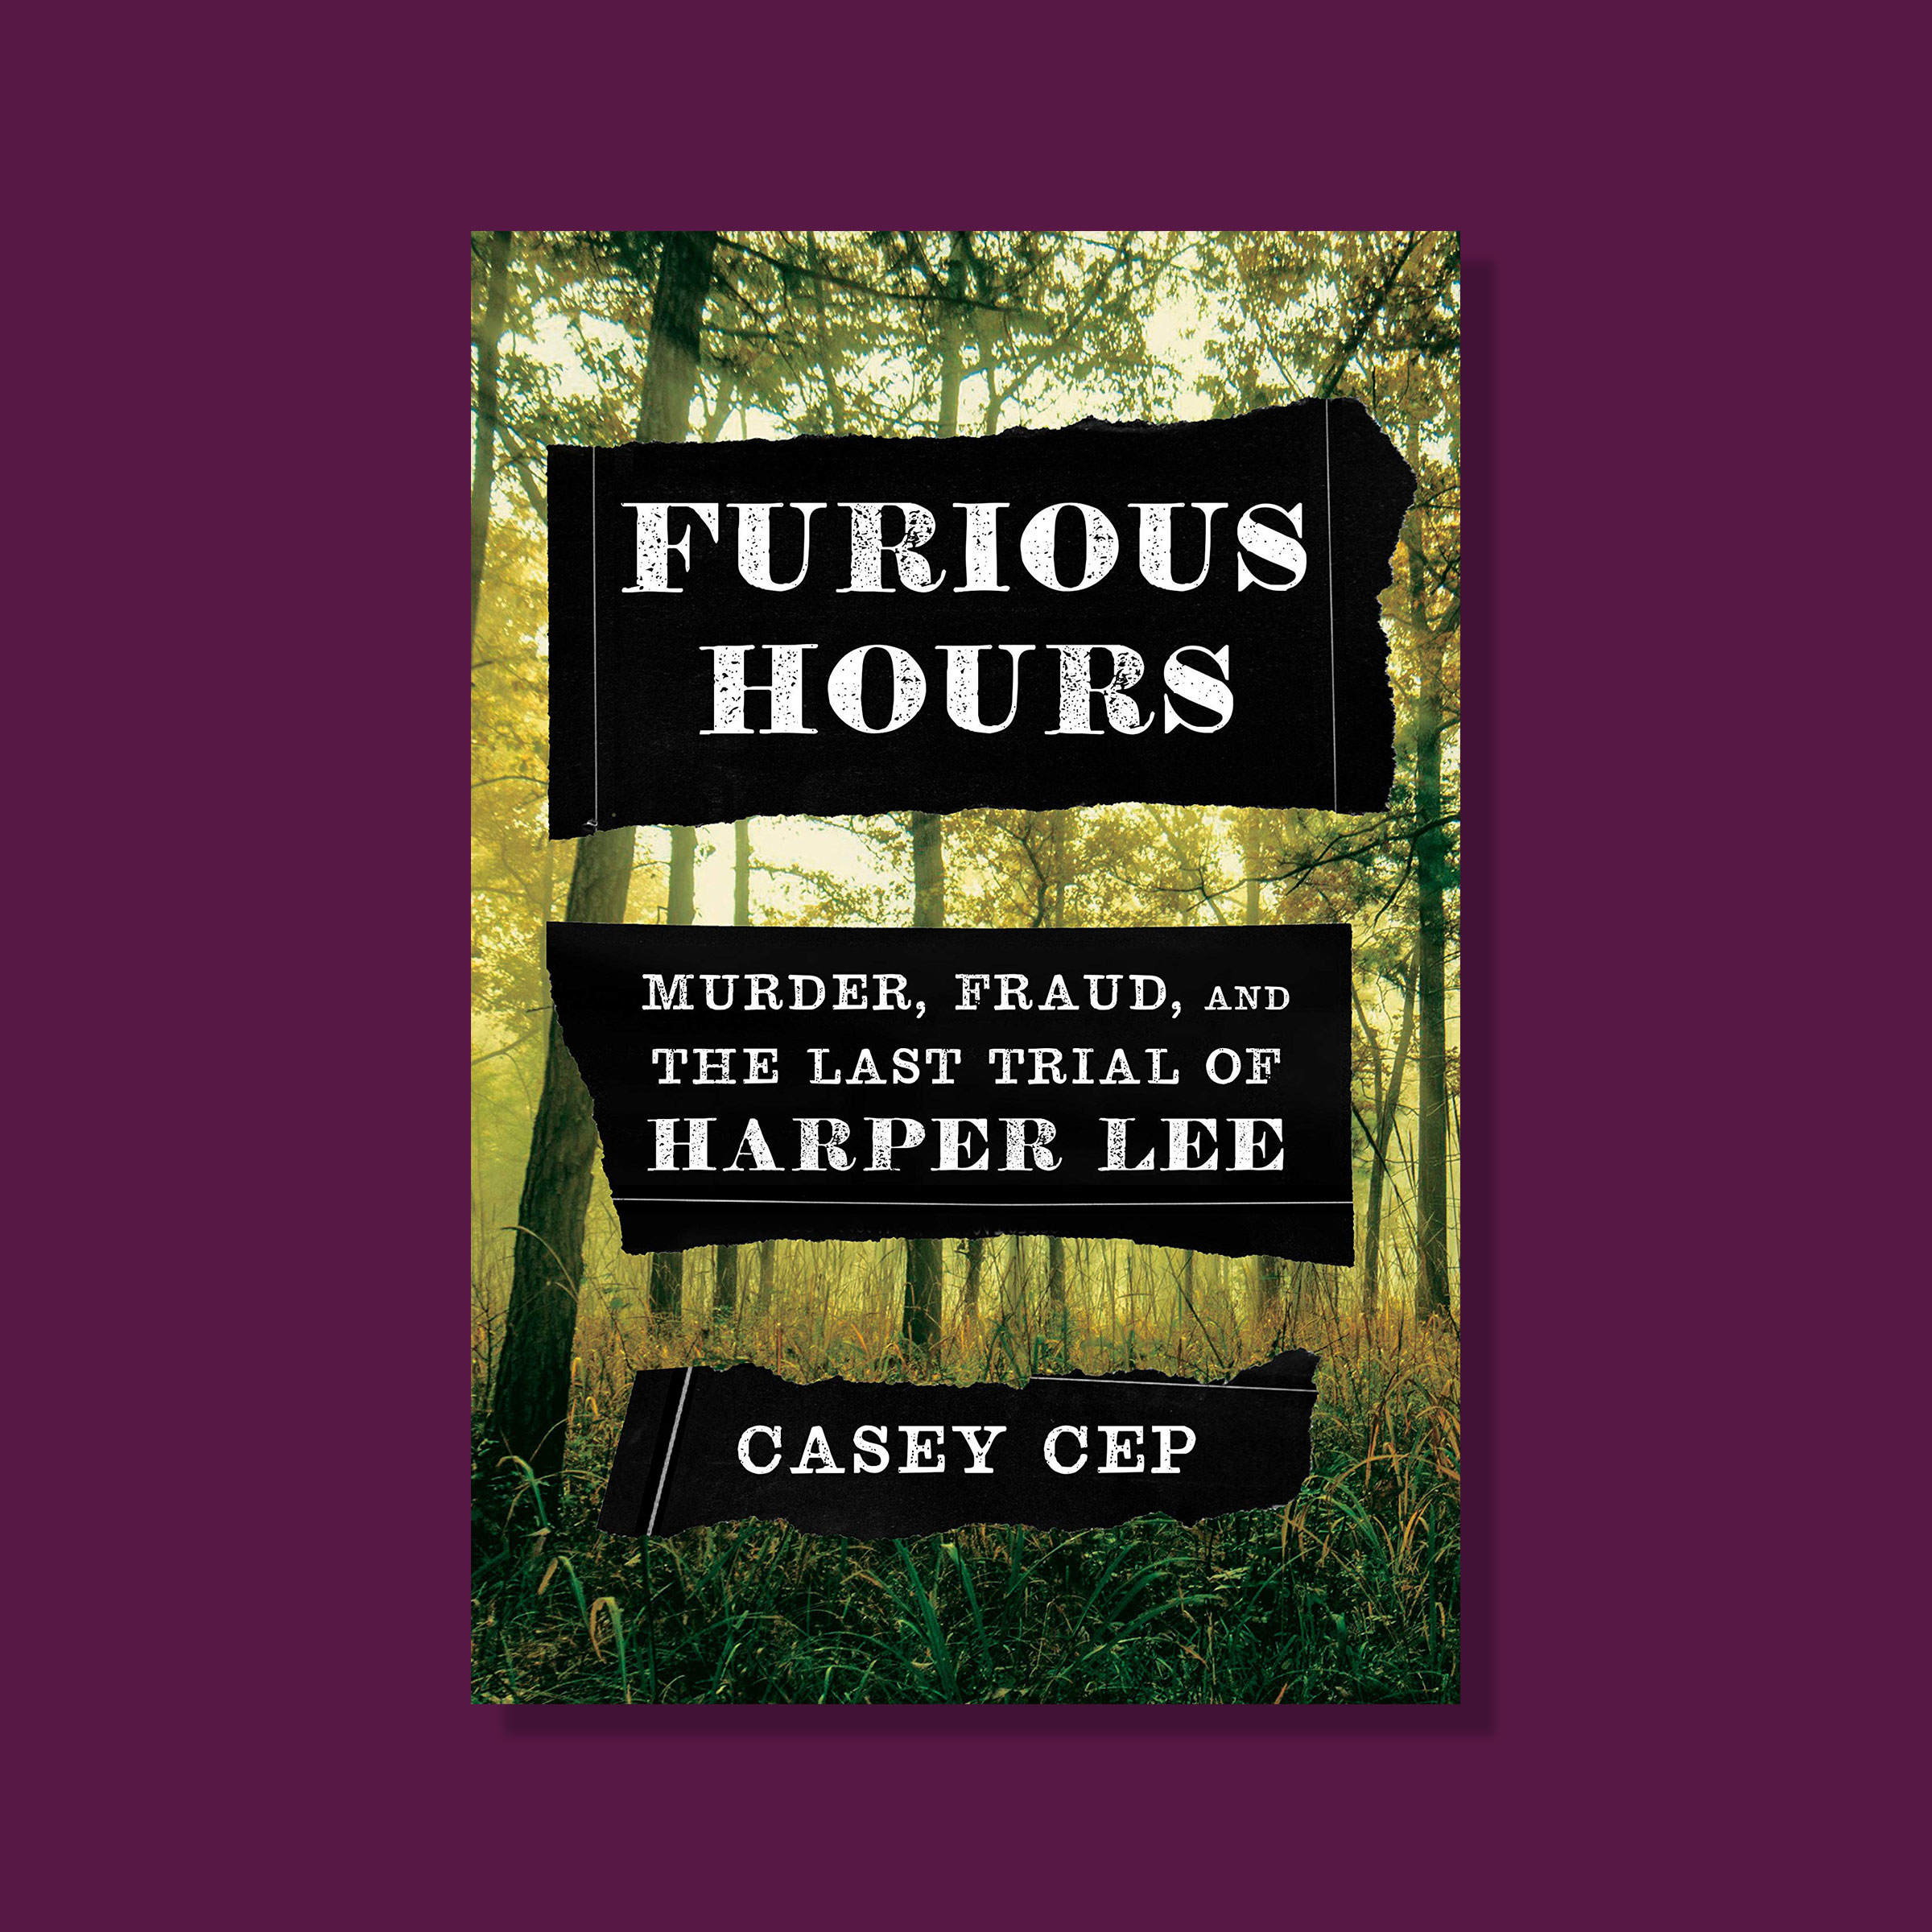 Furious Hours by Casey Cep